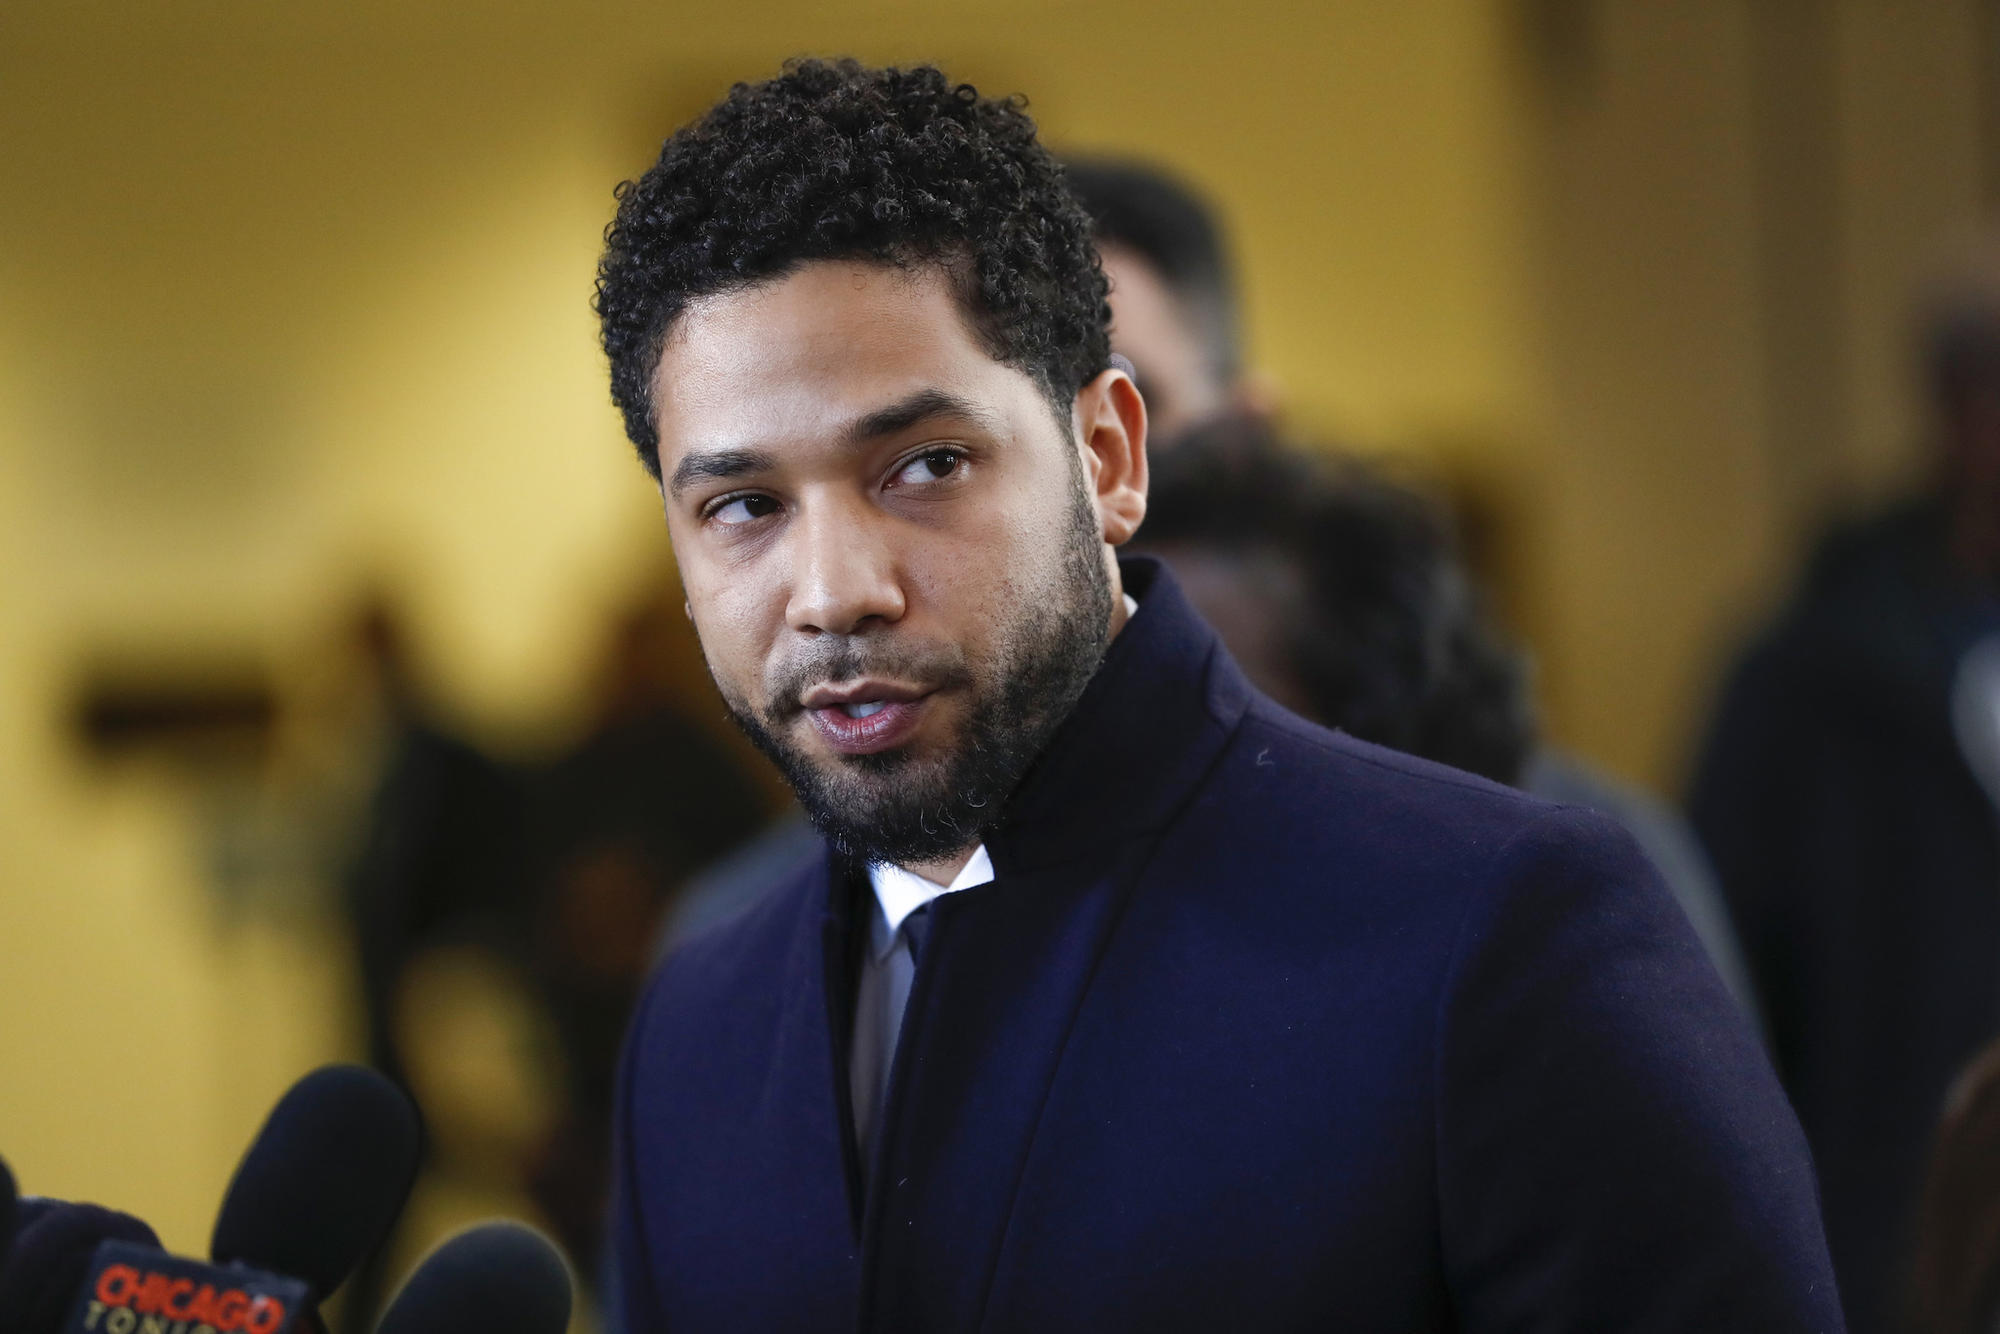 Jussie Smollett Seeks Rehabilitation After Struggling For Years